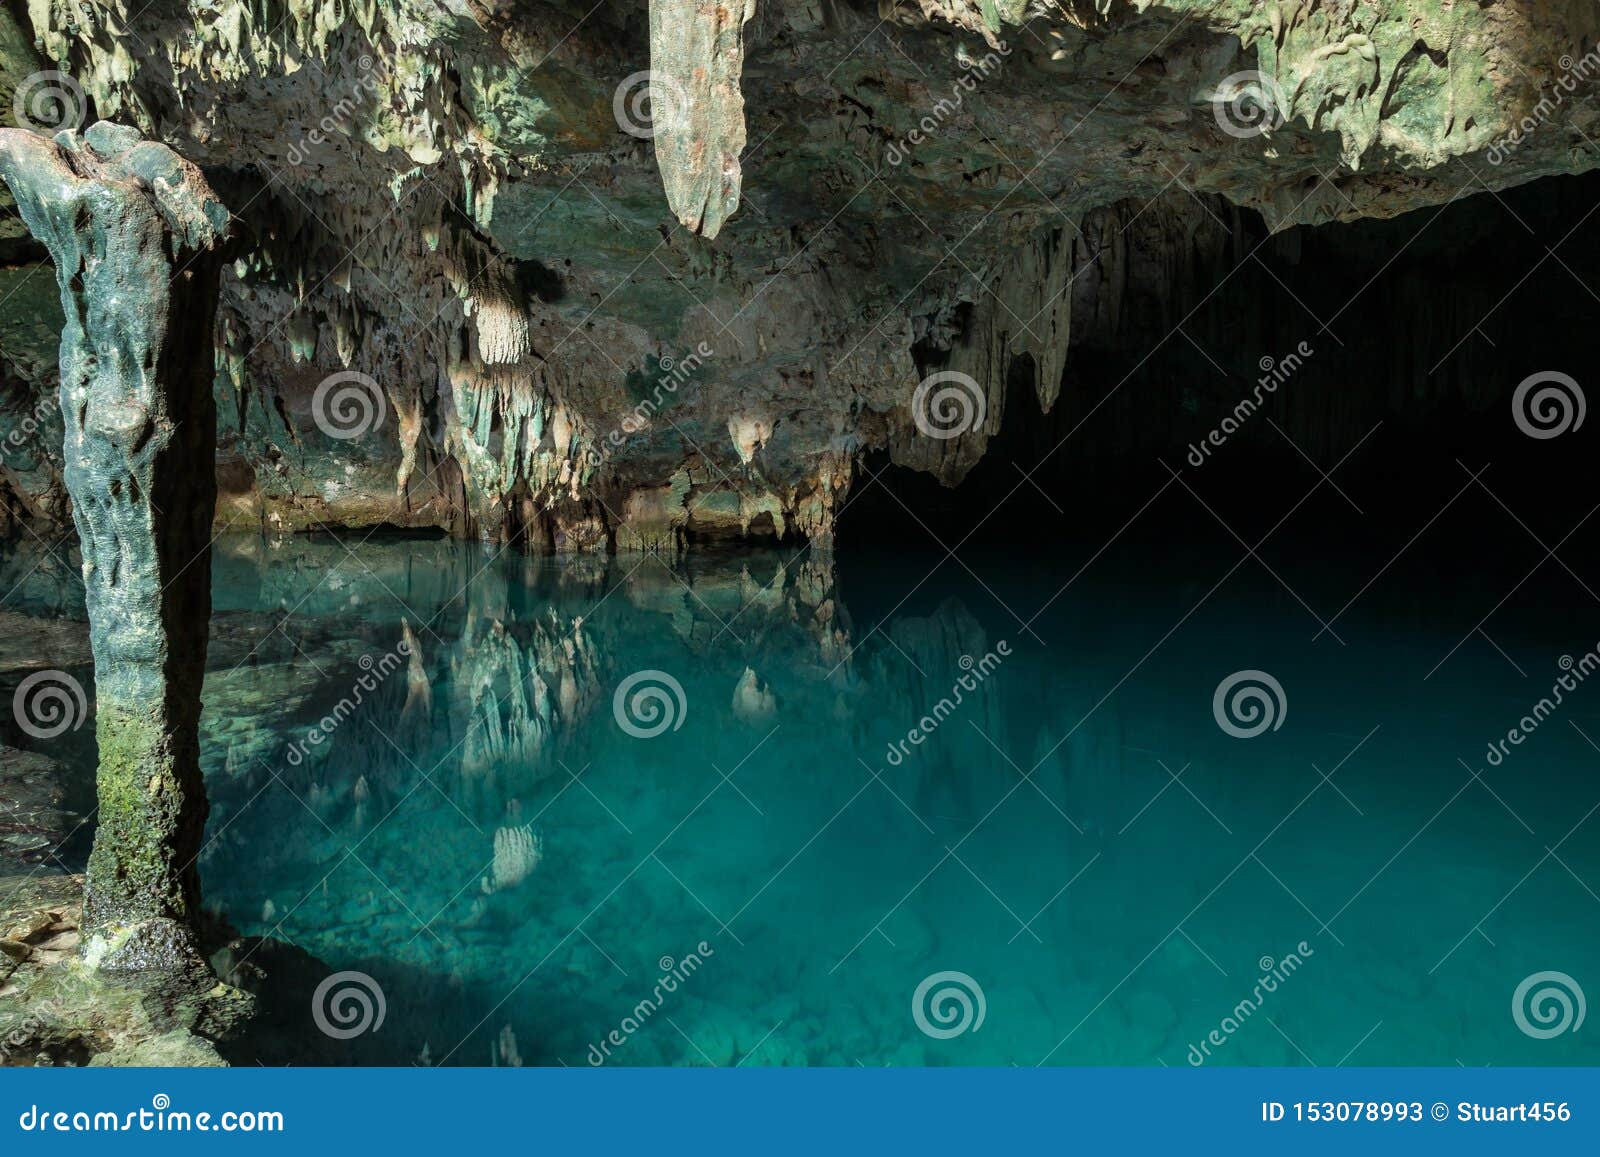 a clear blue underground lake popular with swimmers in gua rangko rangko cave near labuan bajo, flores, indonesia